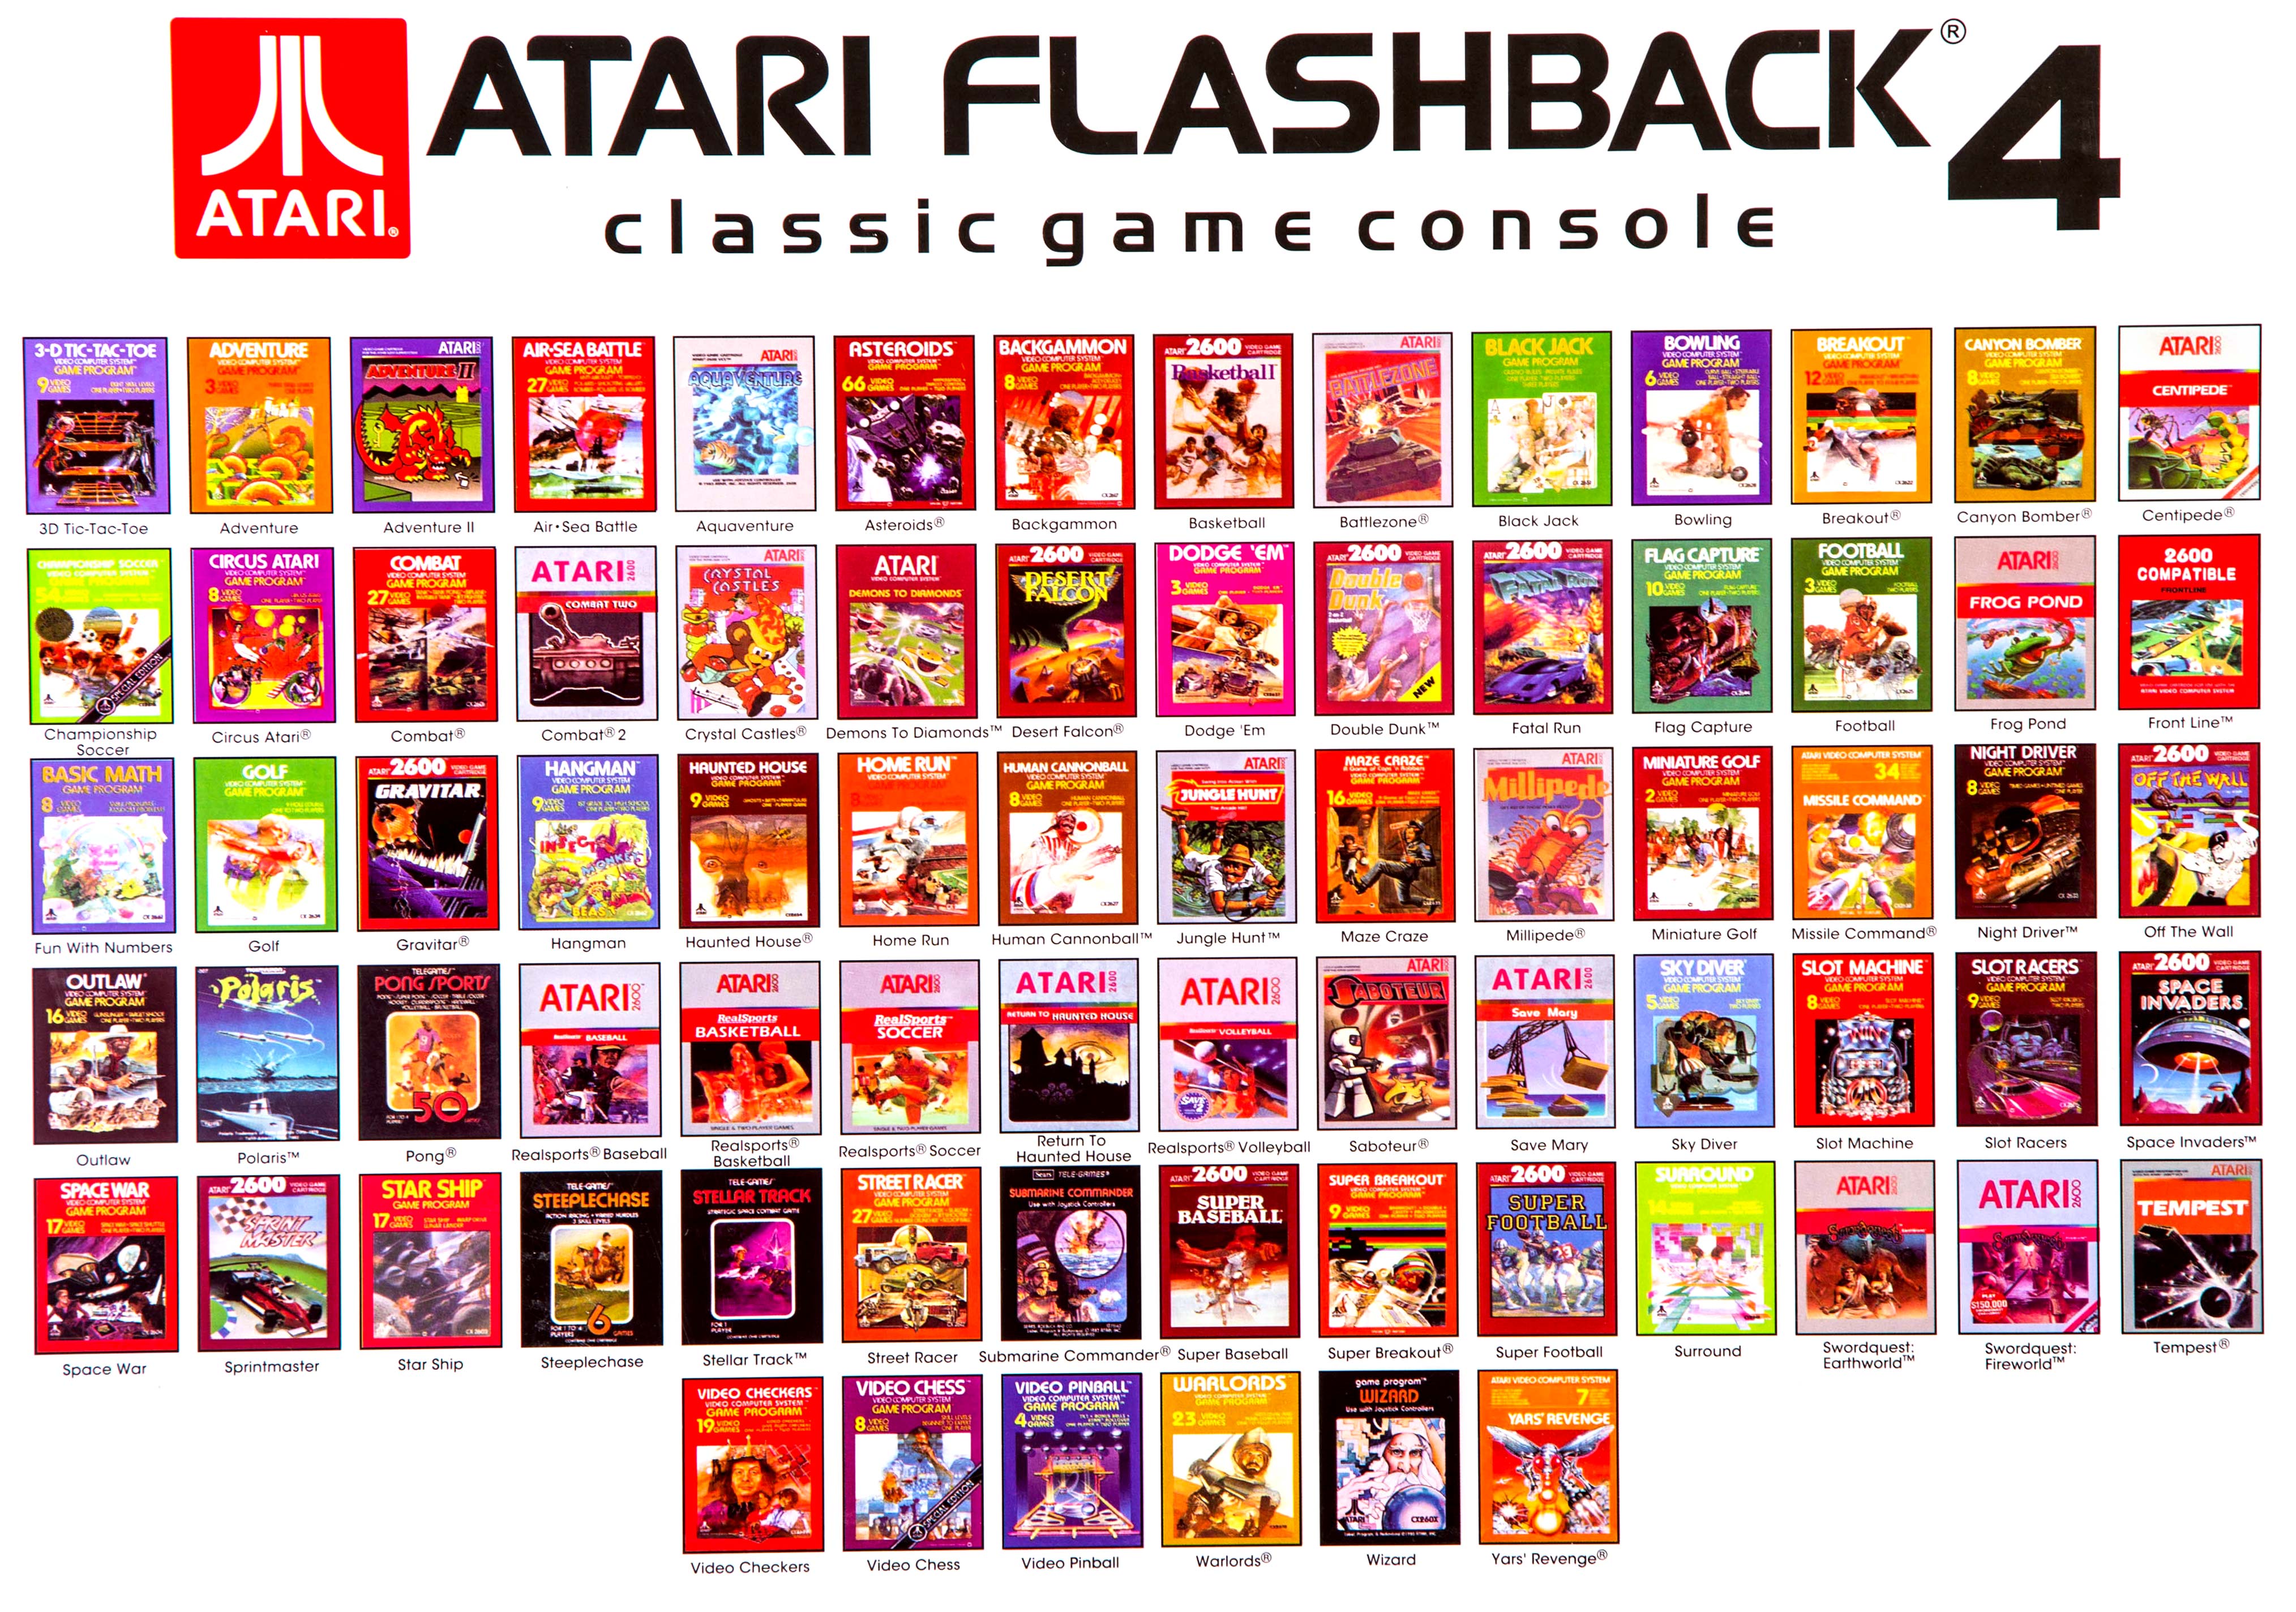 What Games Are On The Atari Flashback 4